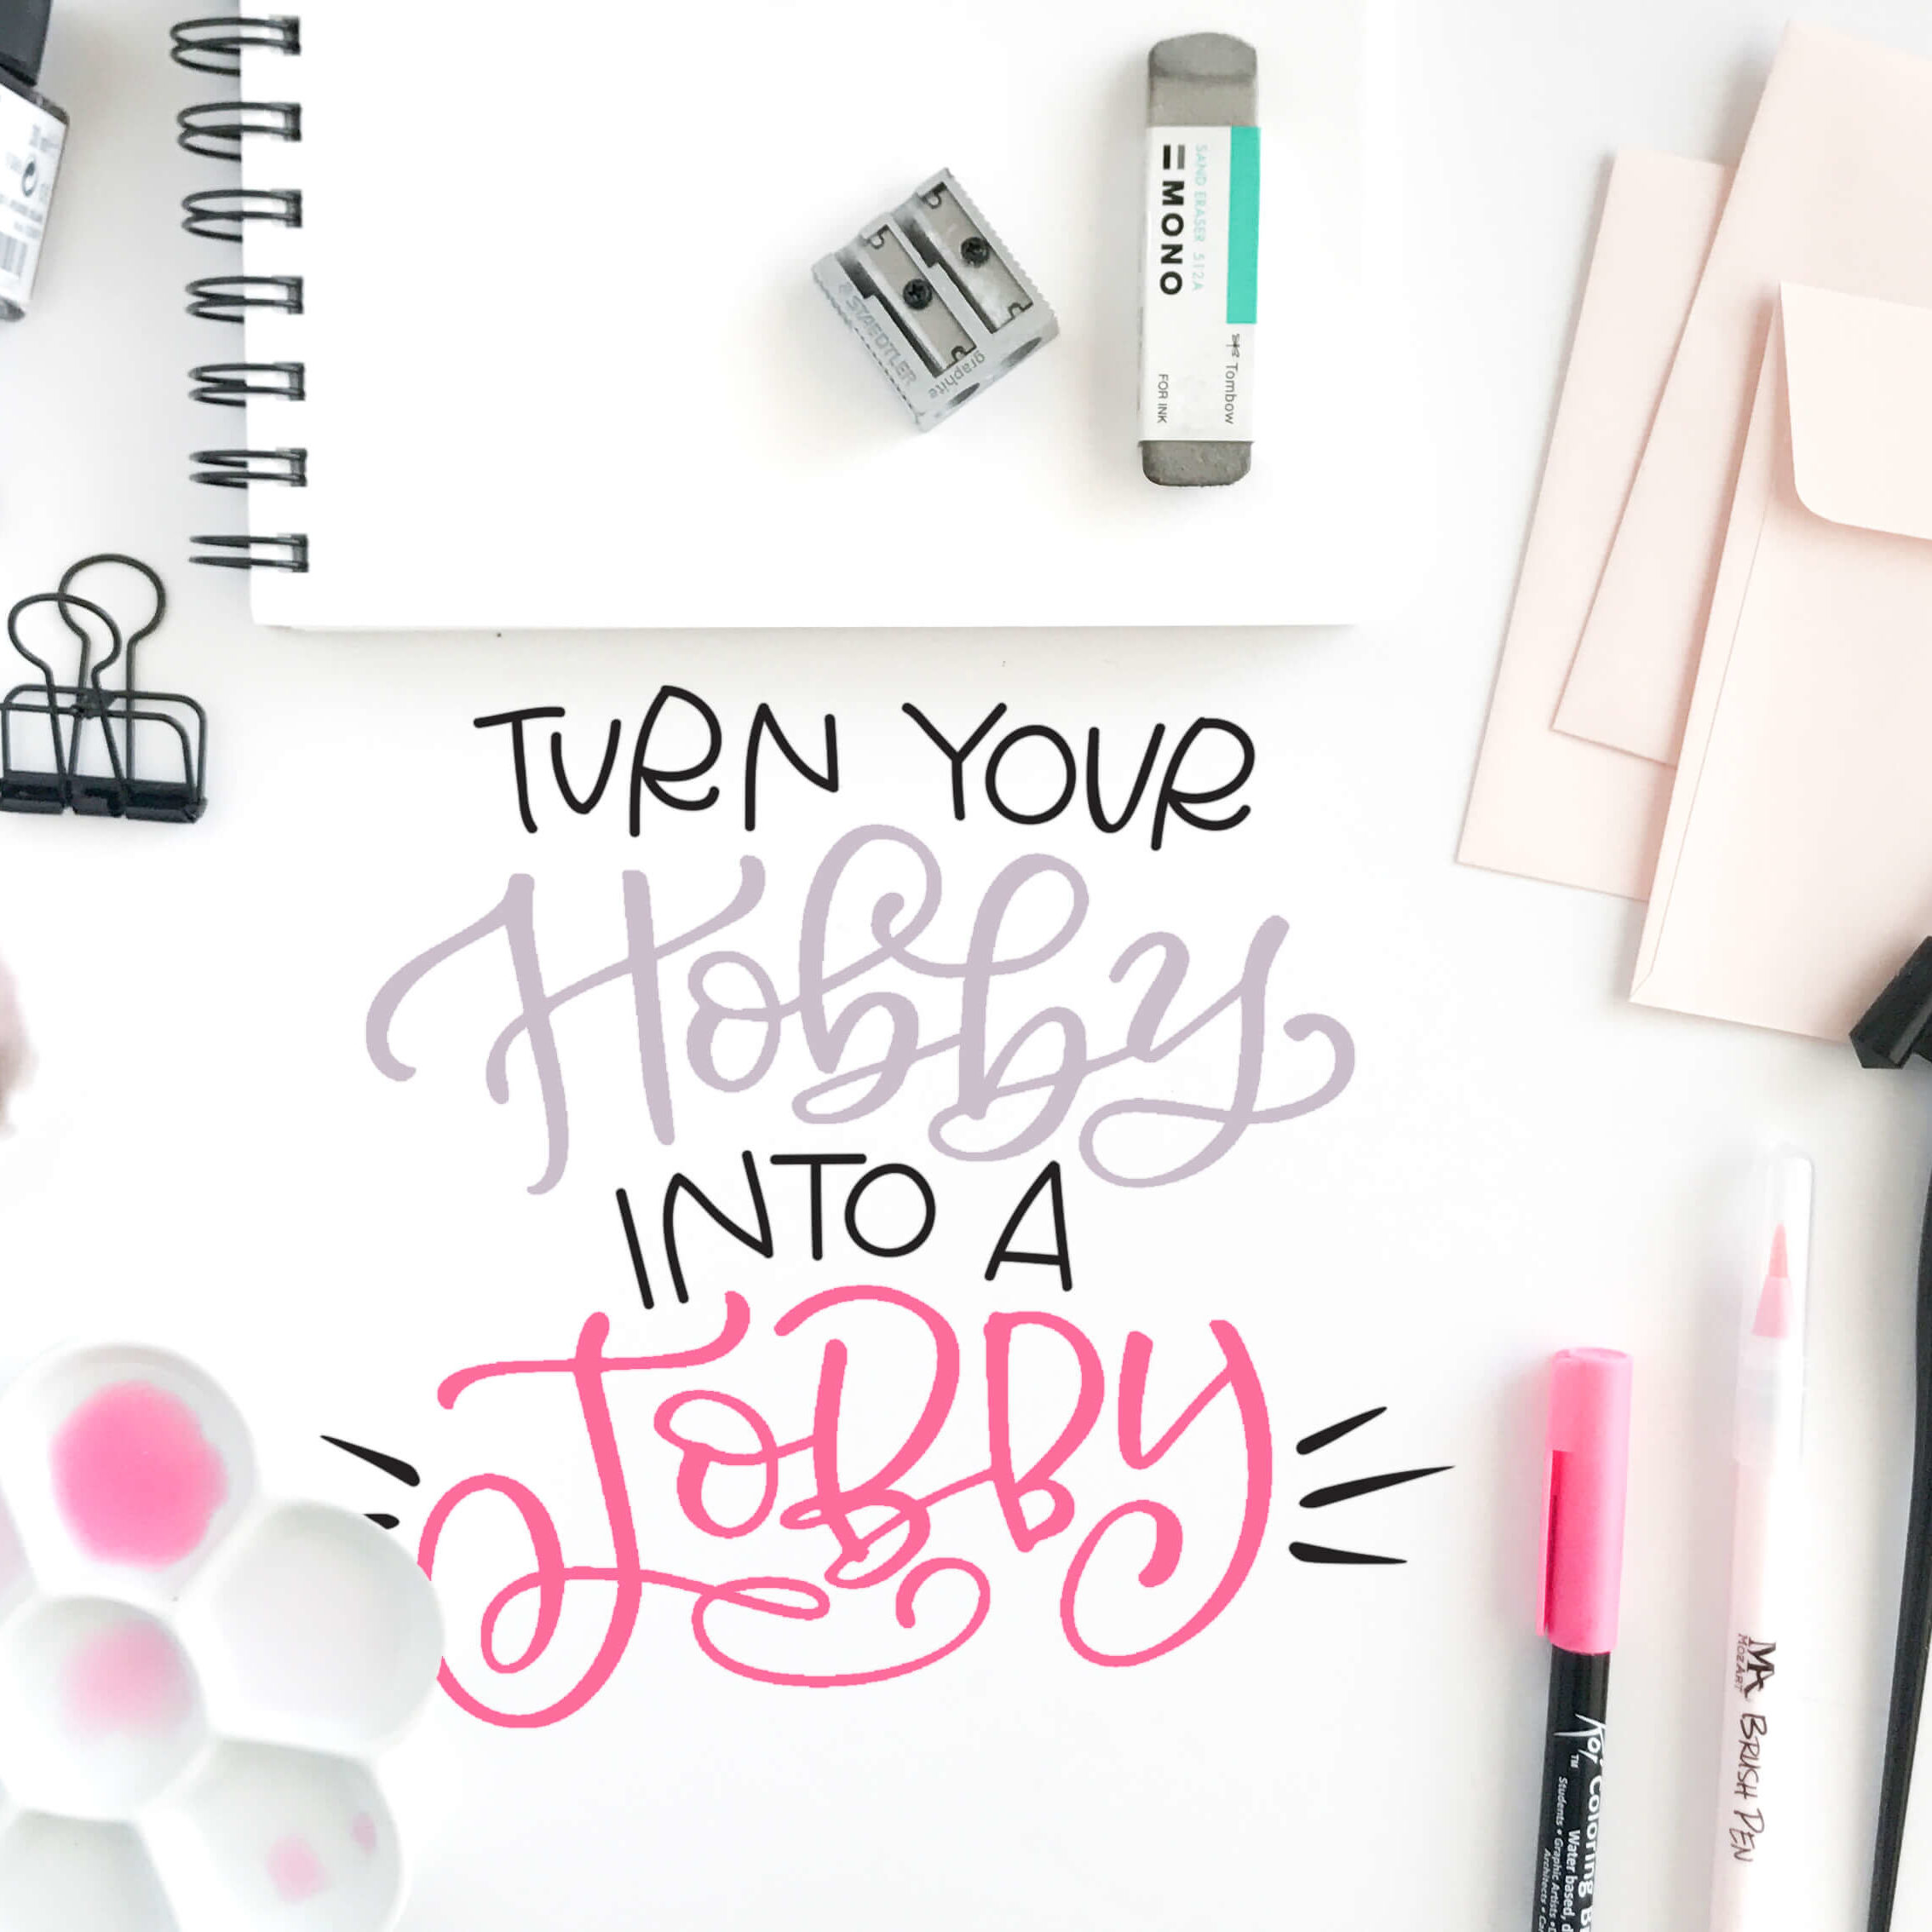 Get help turning your lettering hobby into a job with this online course from Amanda Arneill at amandaarneill.com